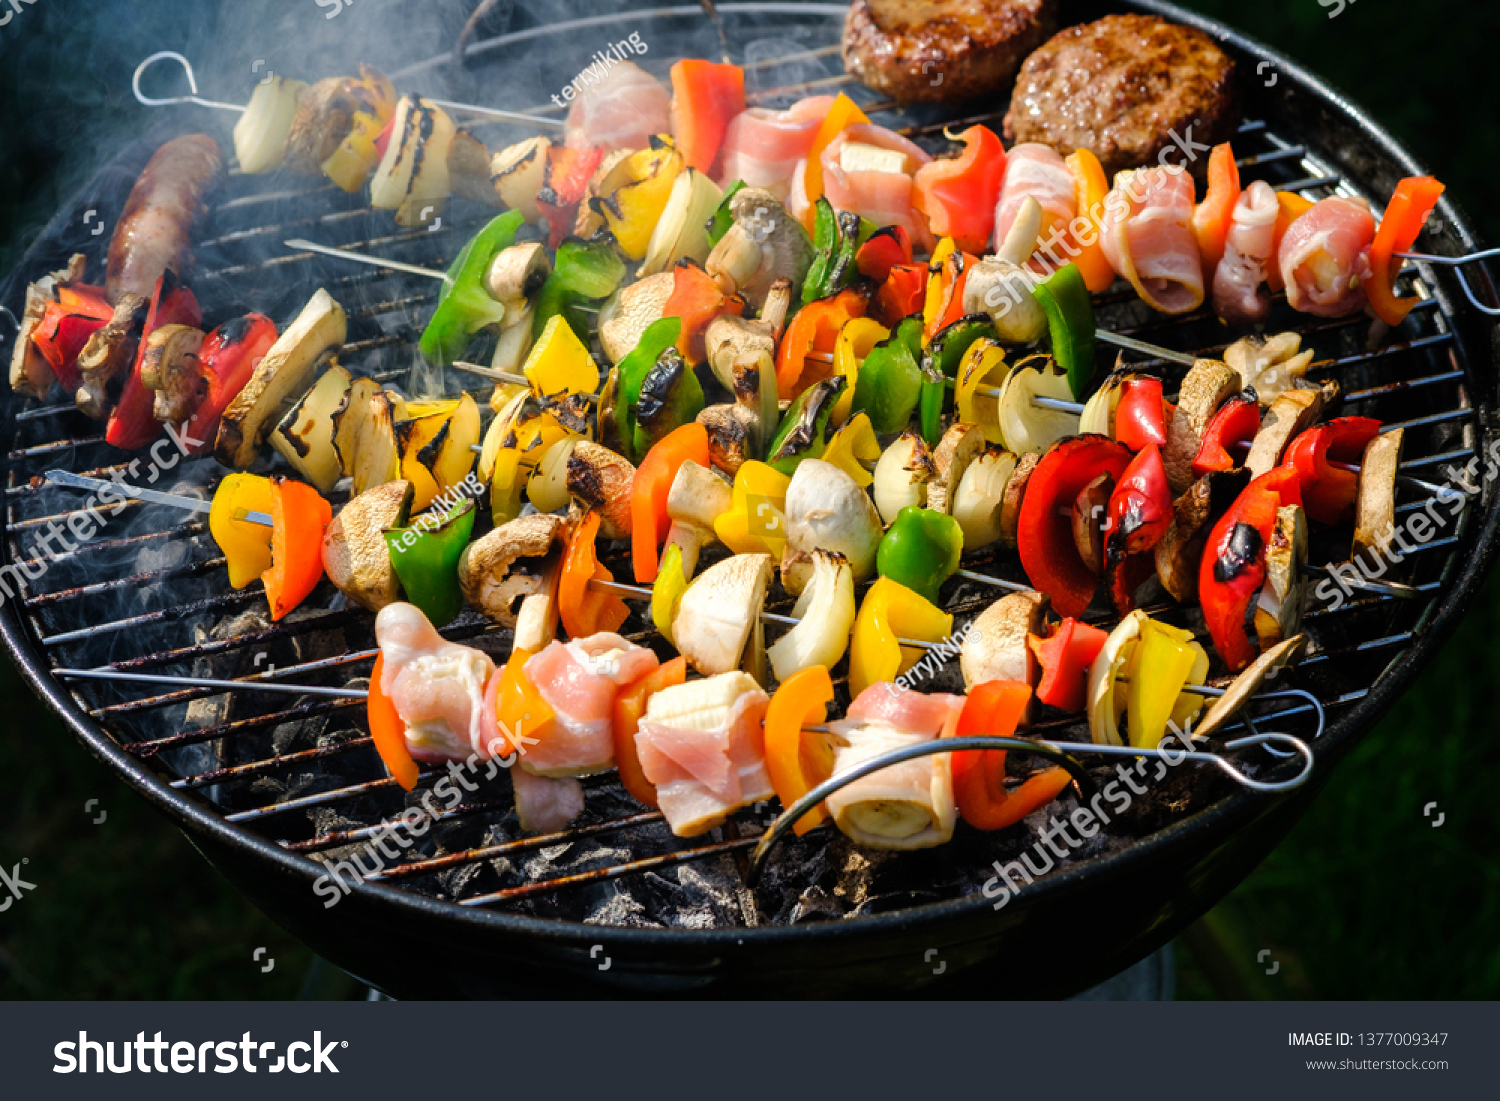 Barbecue Cooking Shish Kebabs Beef Burgers Stock Photo (Edit Now ...